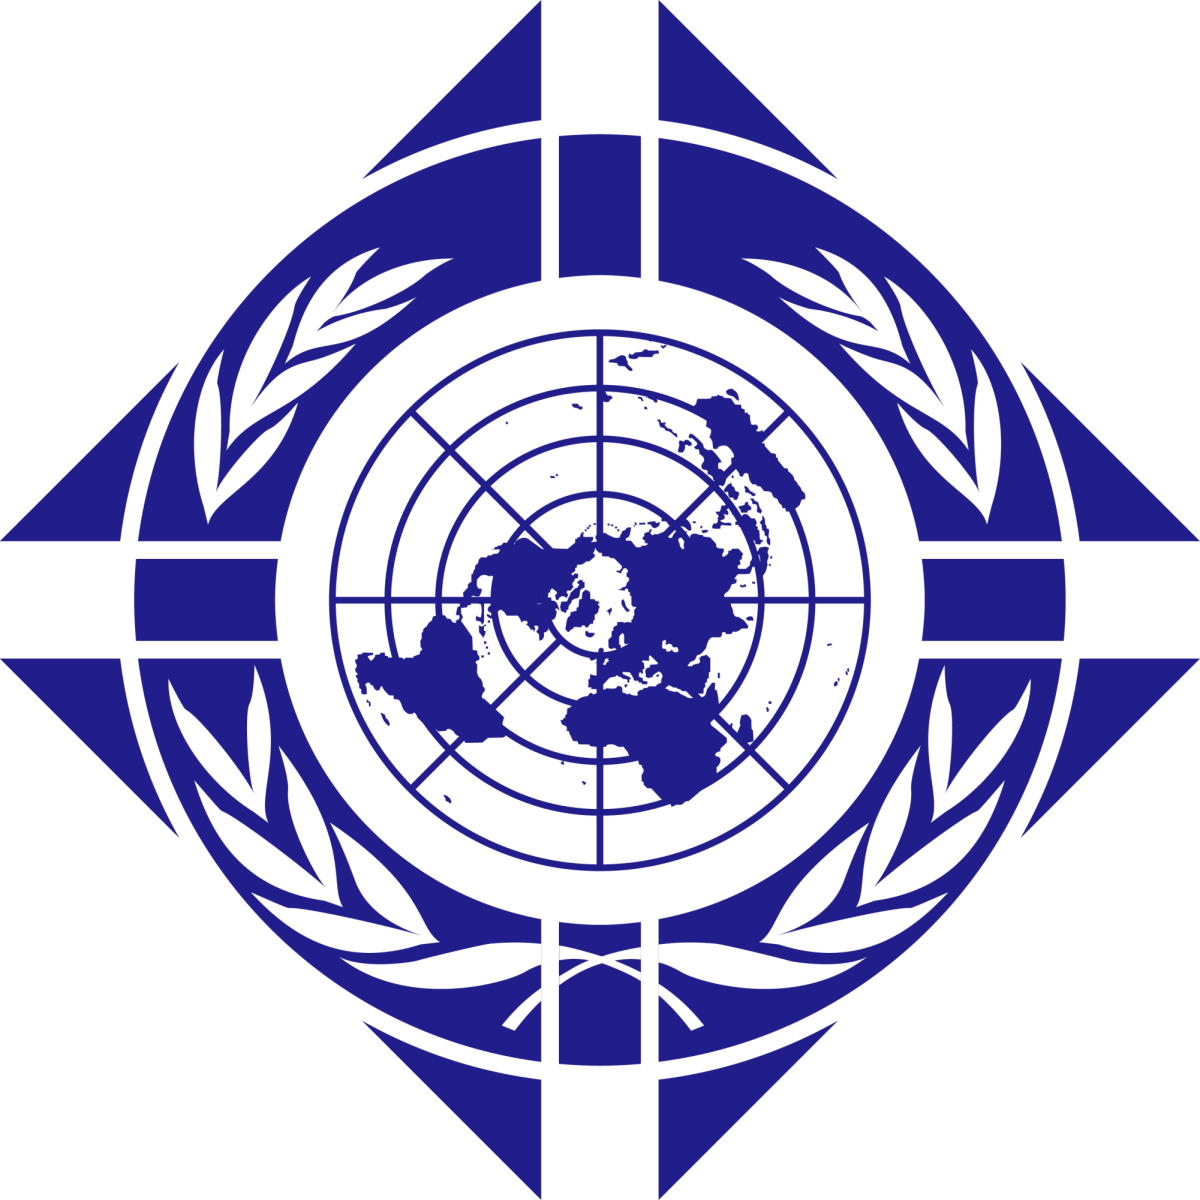 The+symbol+for+Model+UN+show+the+world.++The+club+gives+students+the+opportunity+to+understand+the+perspectives+of+different+countries+around+the+world.+